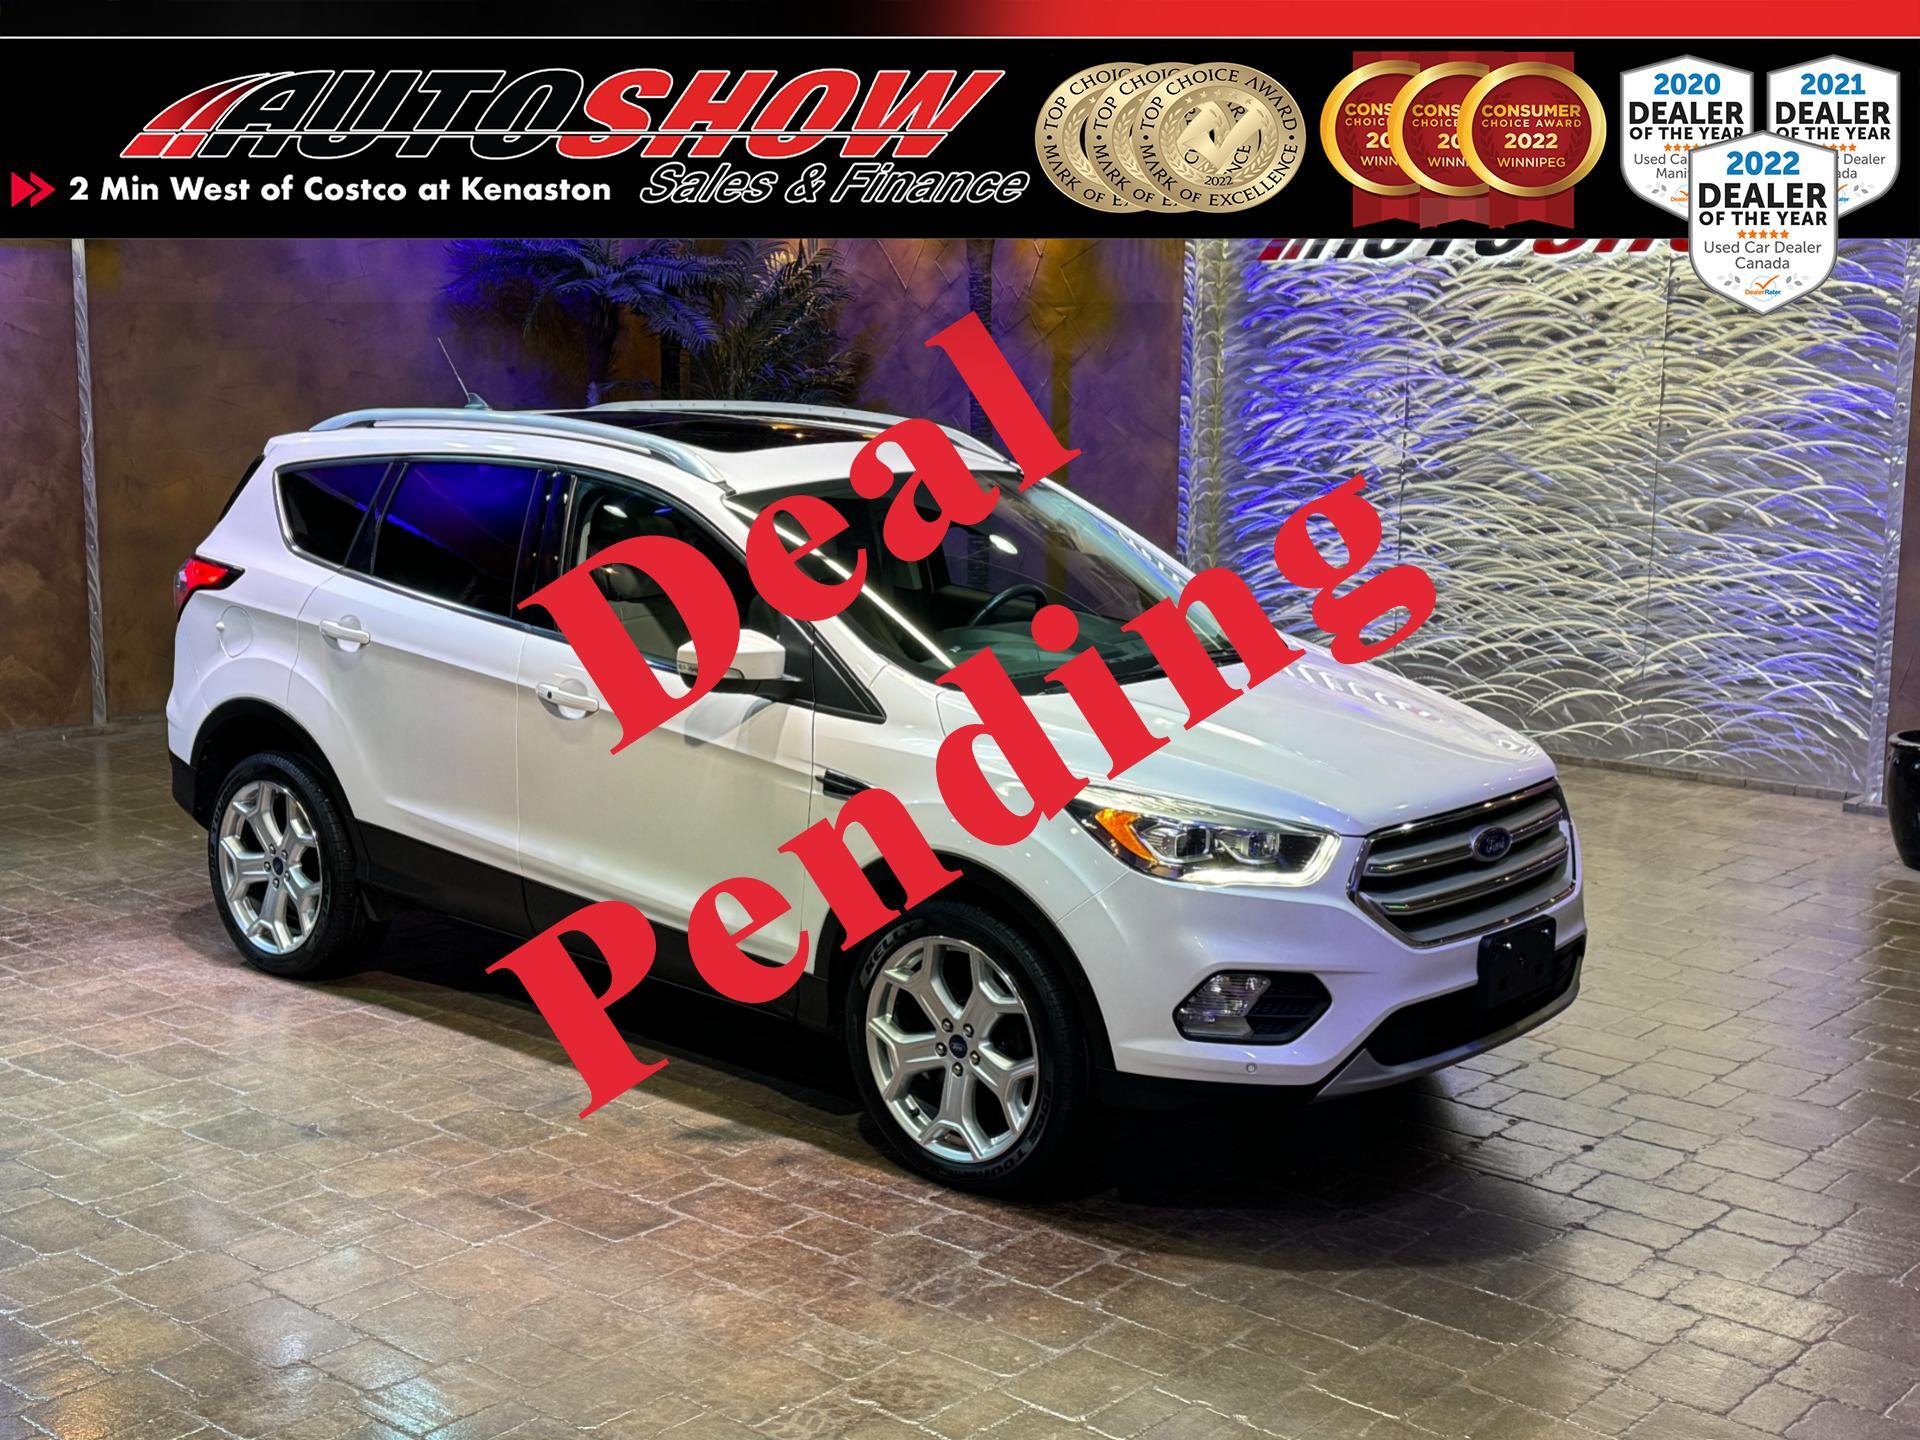 2018 Ford Escape Titanium 4WD - Pano Roof, Nav, Self Parking, Htd L